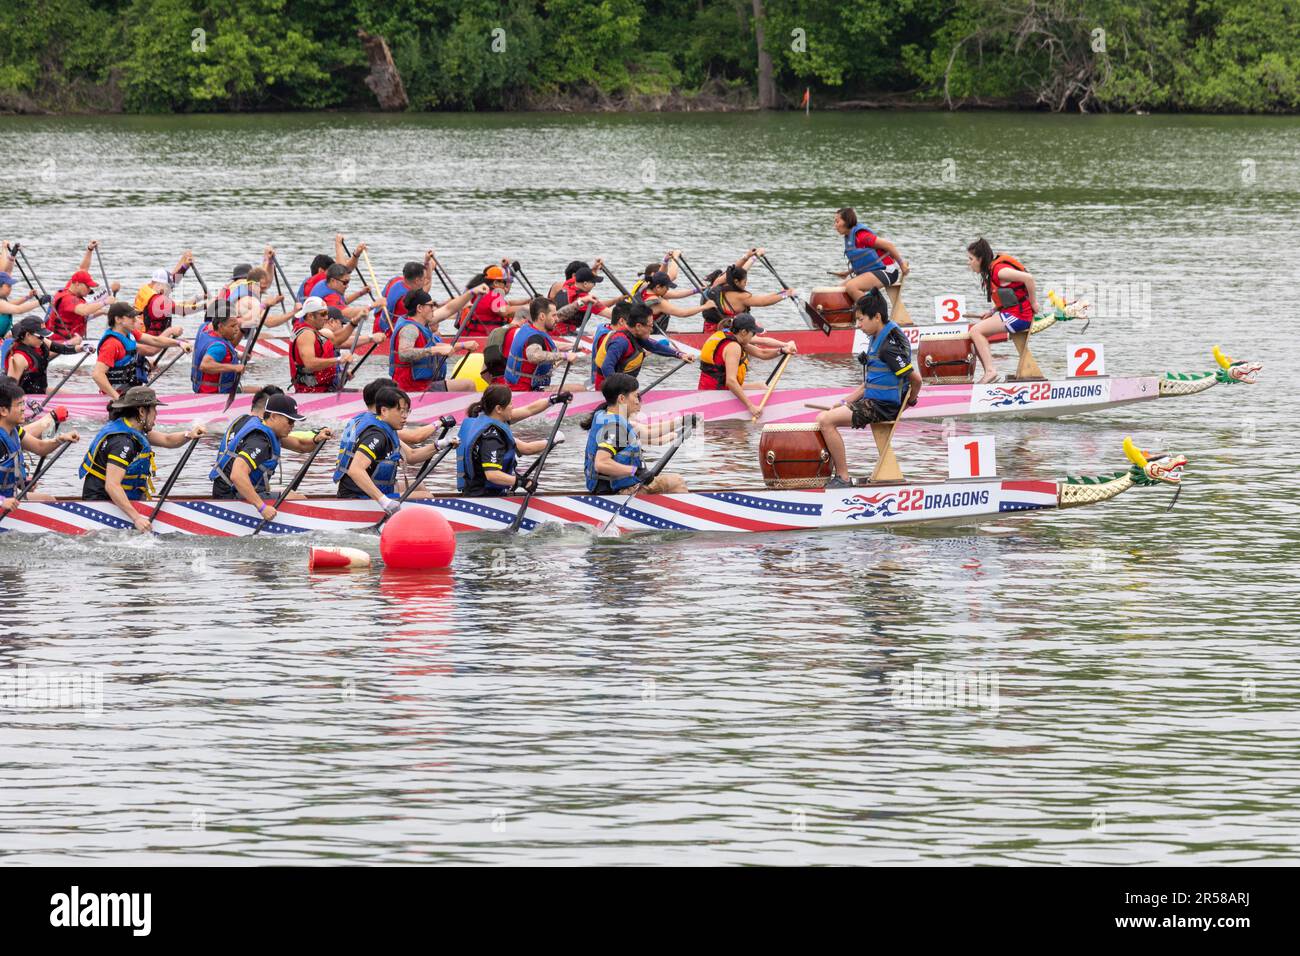 Washington, DC - The start of a 200 meter race during DC Dragon Boat Festival on the Potomac River. Dragon boating is a 2300-year-old Chinese traditio Stock Photo